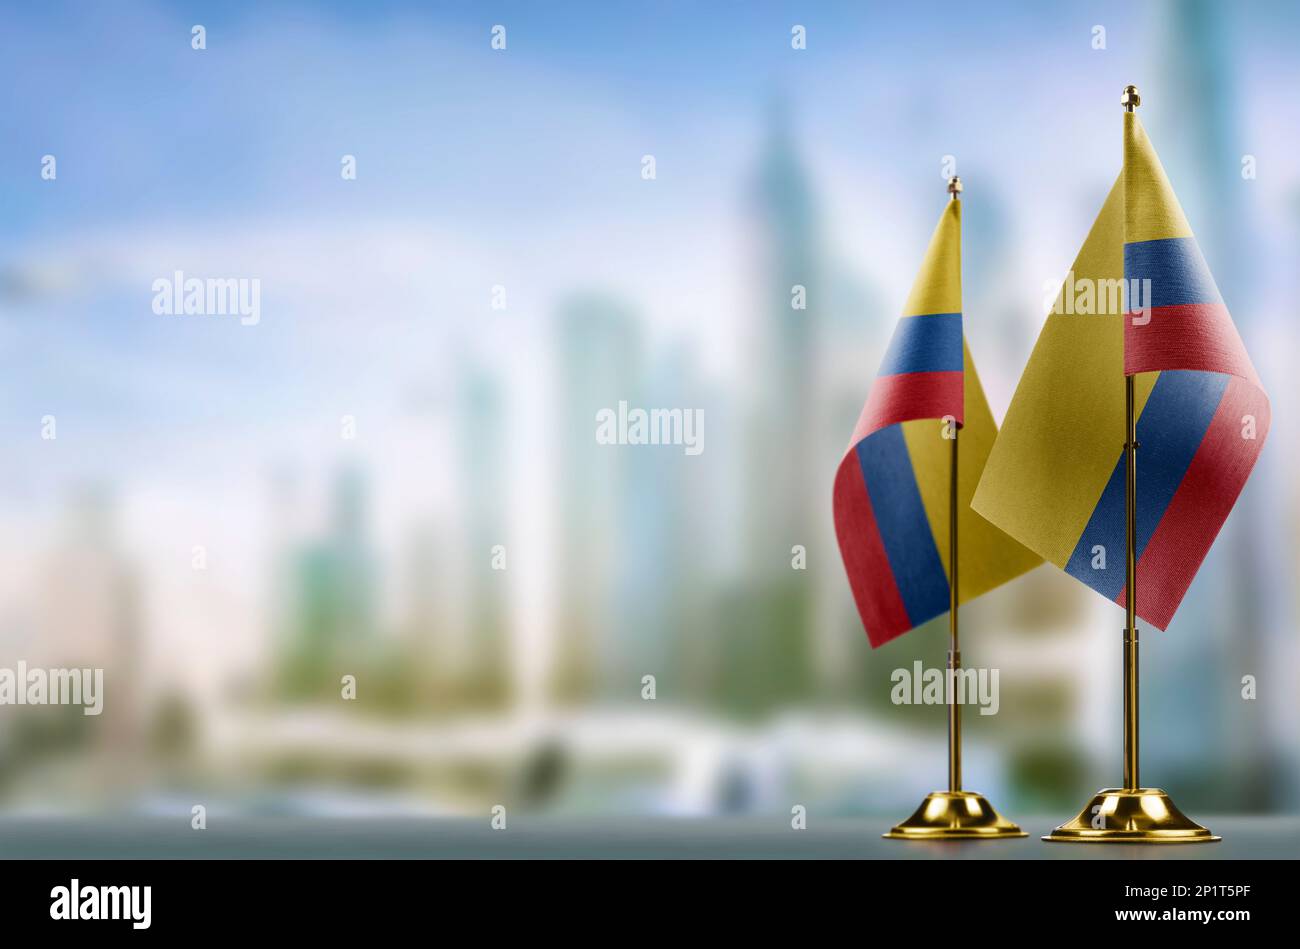 Small flags of the Colombia on an abstract blurry background. Stock Photo